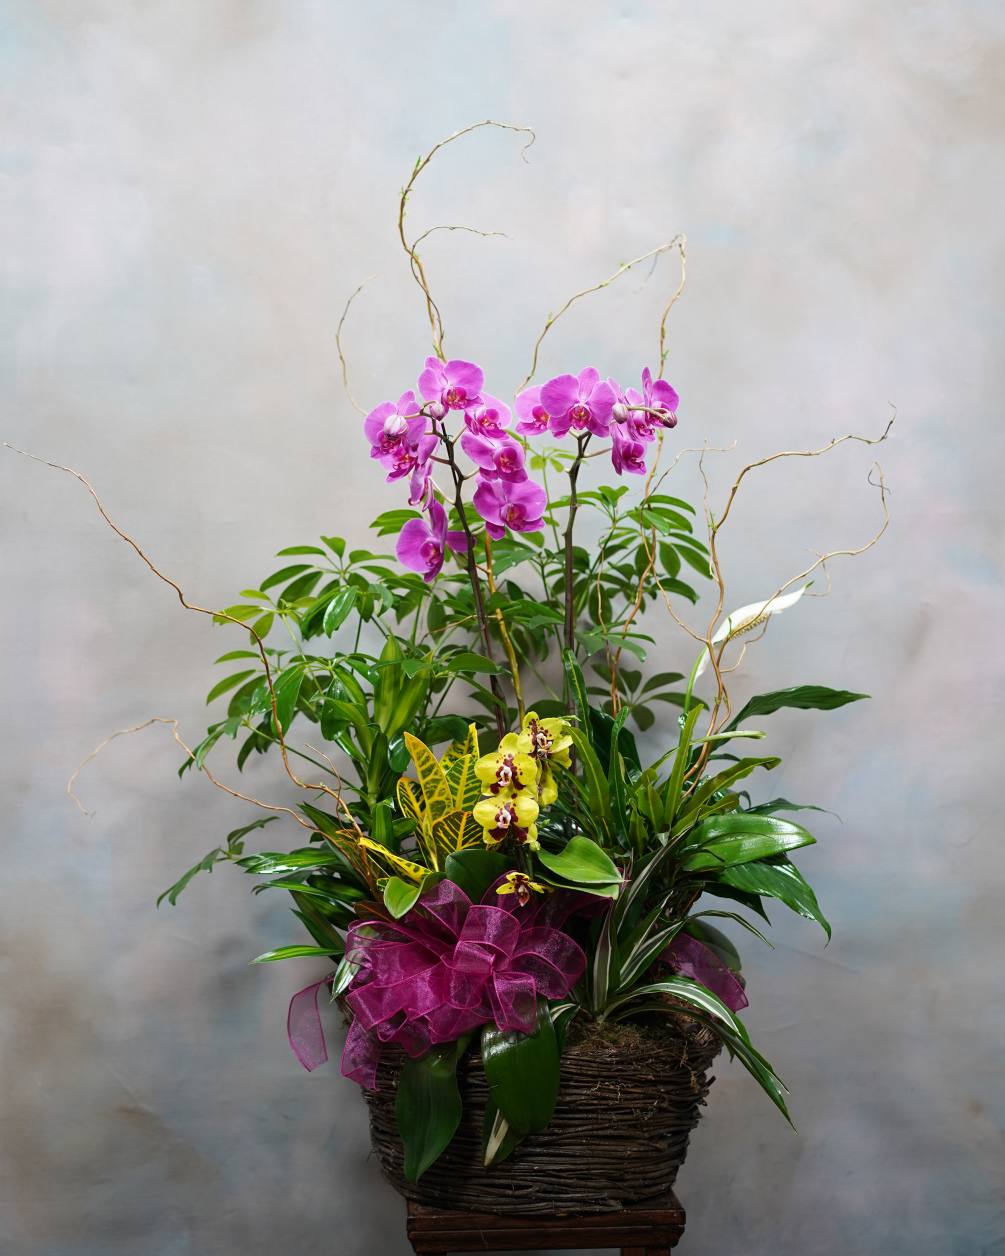 A fresh selection of our foliage plants with showy orchids and curly